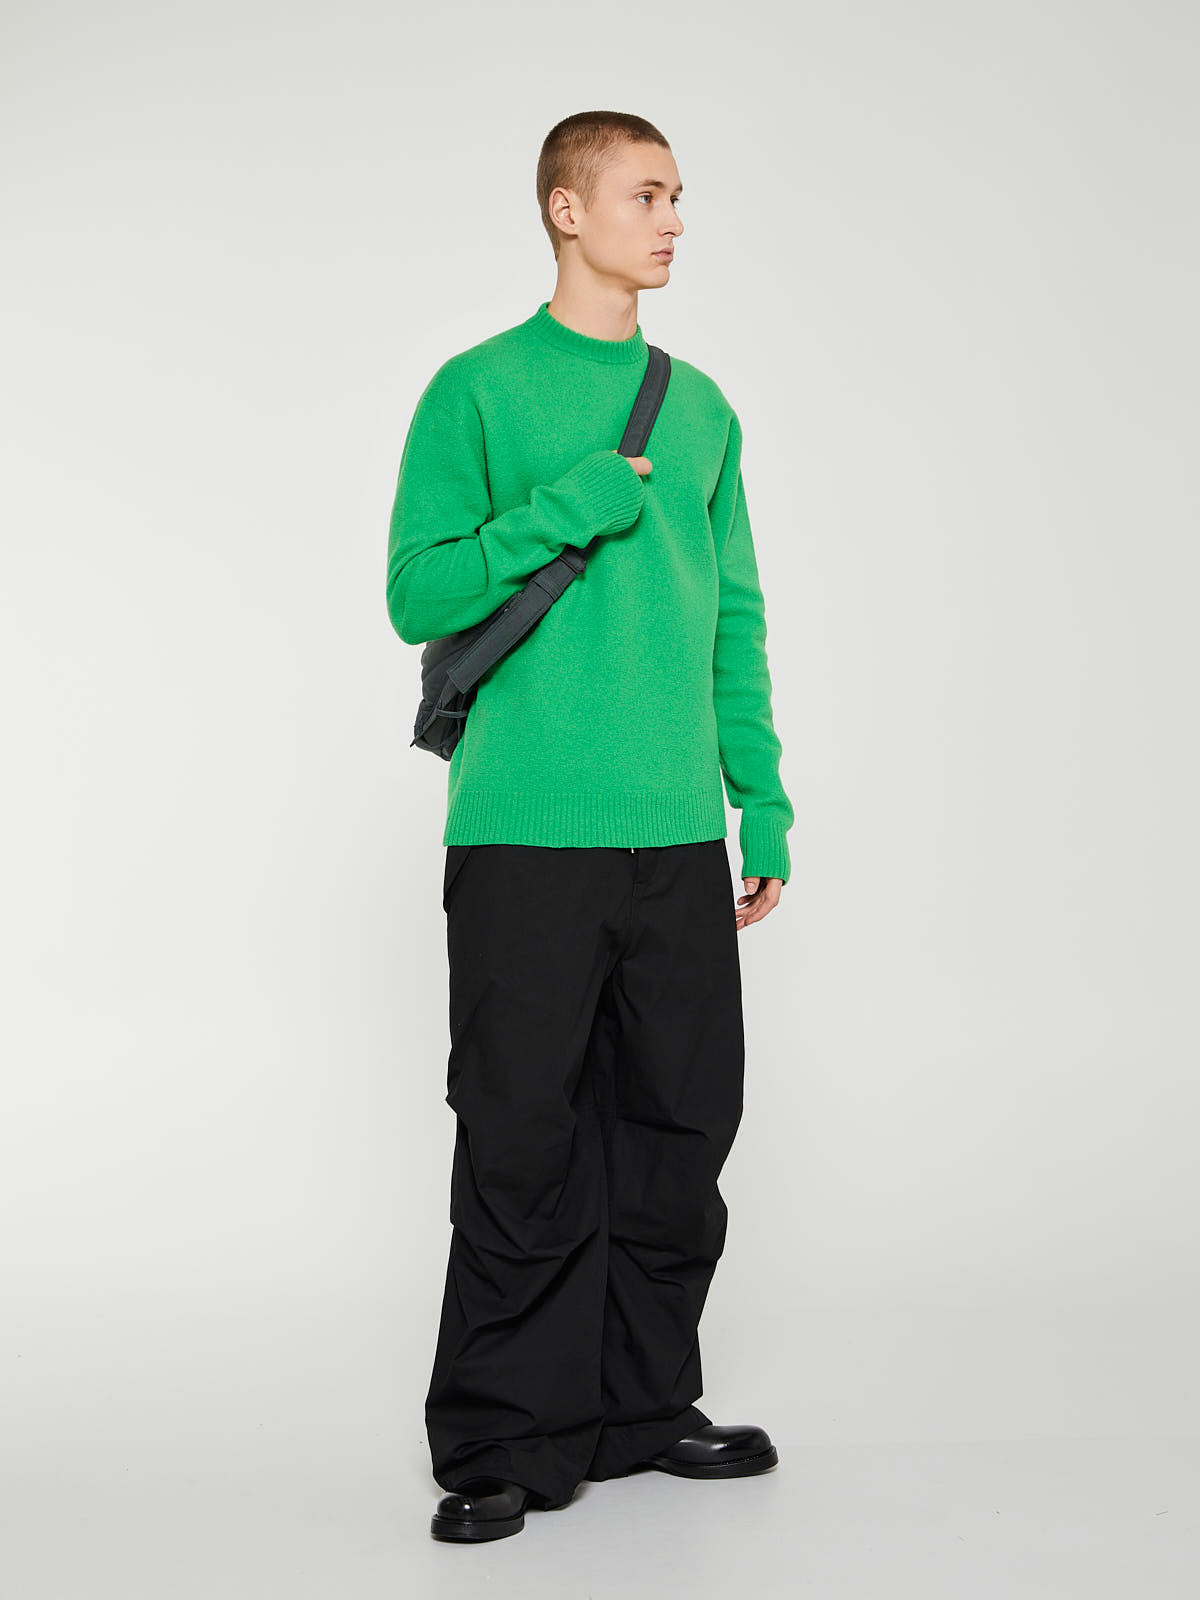 Jil Sander | Discover the selection at STOY – stoy